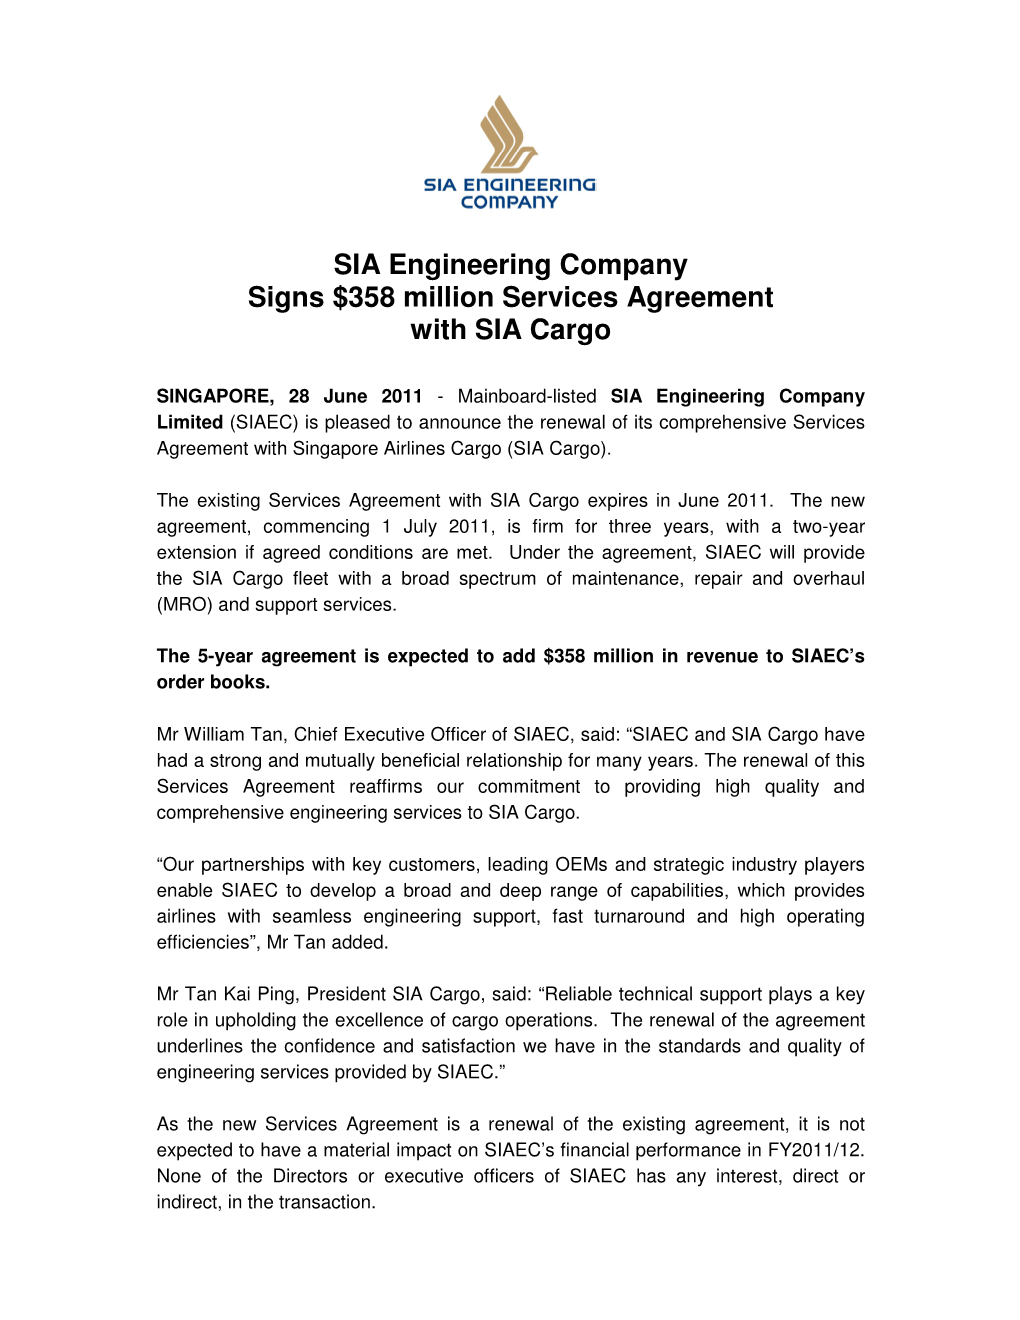 SIA Engineering Company Signs $358 Million Services Agreement with SIA Cargo